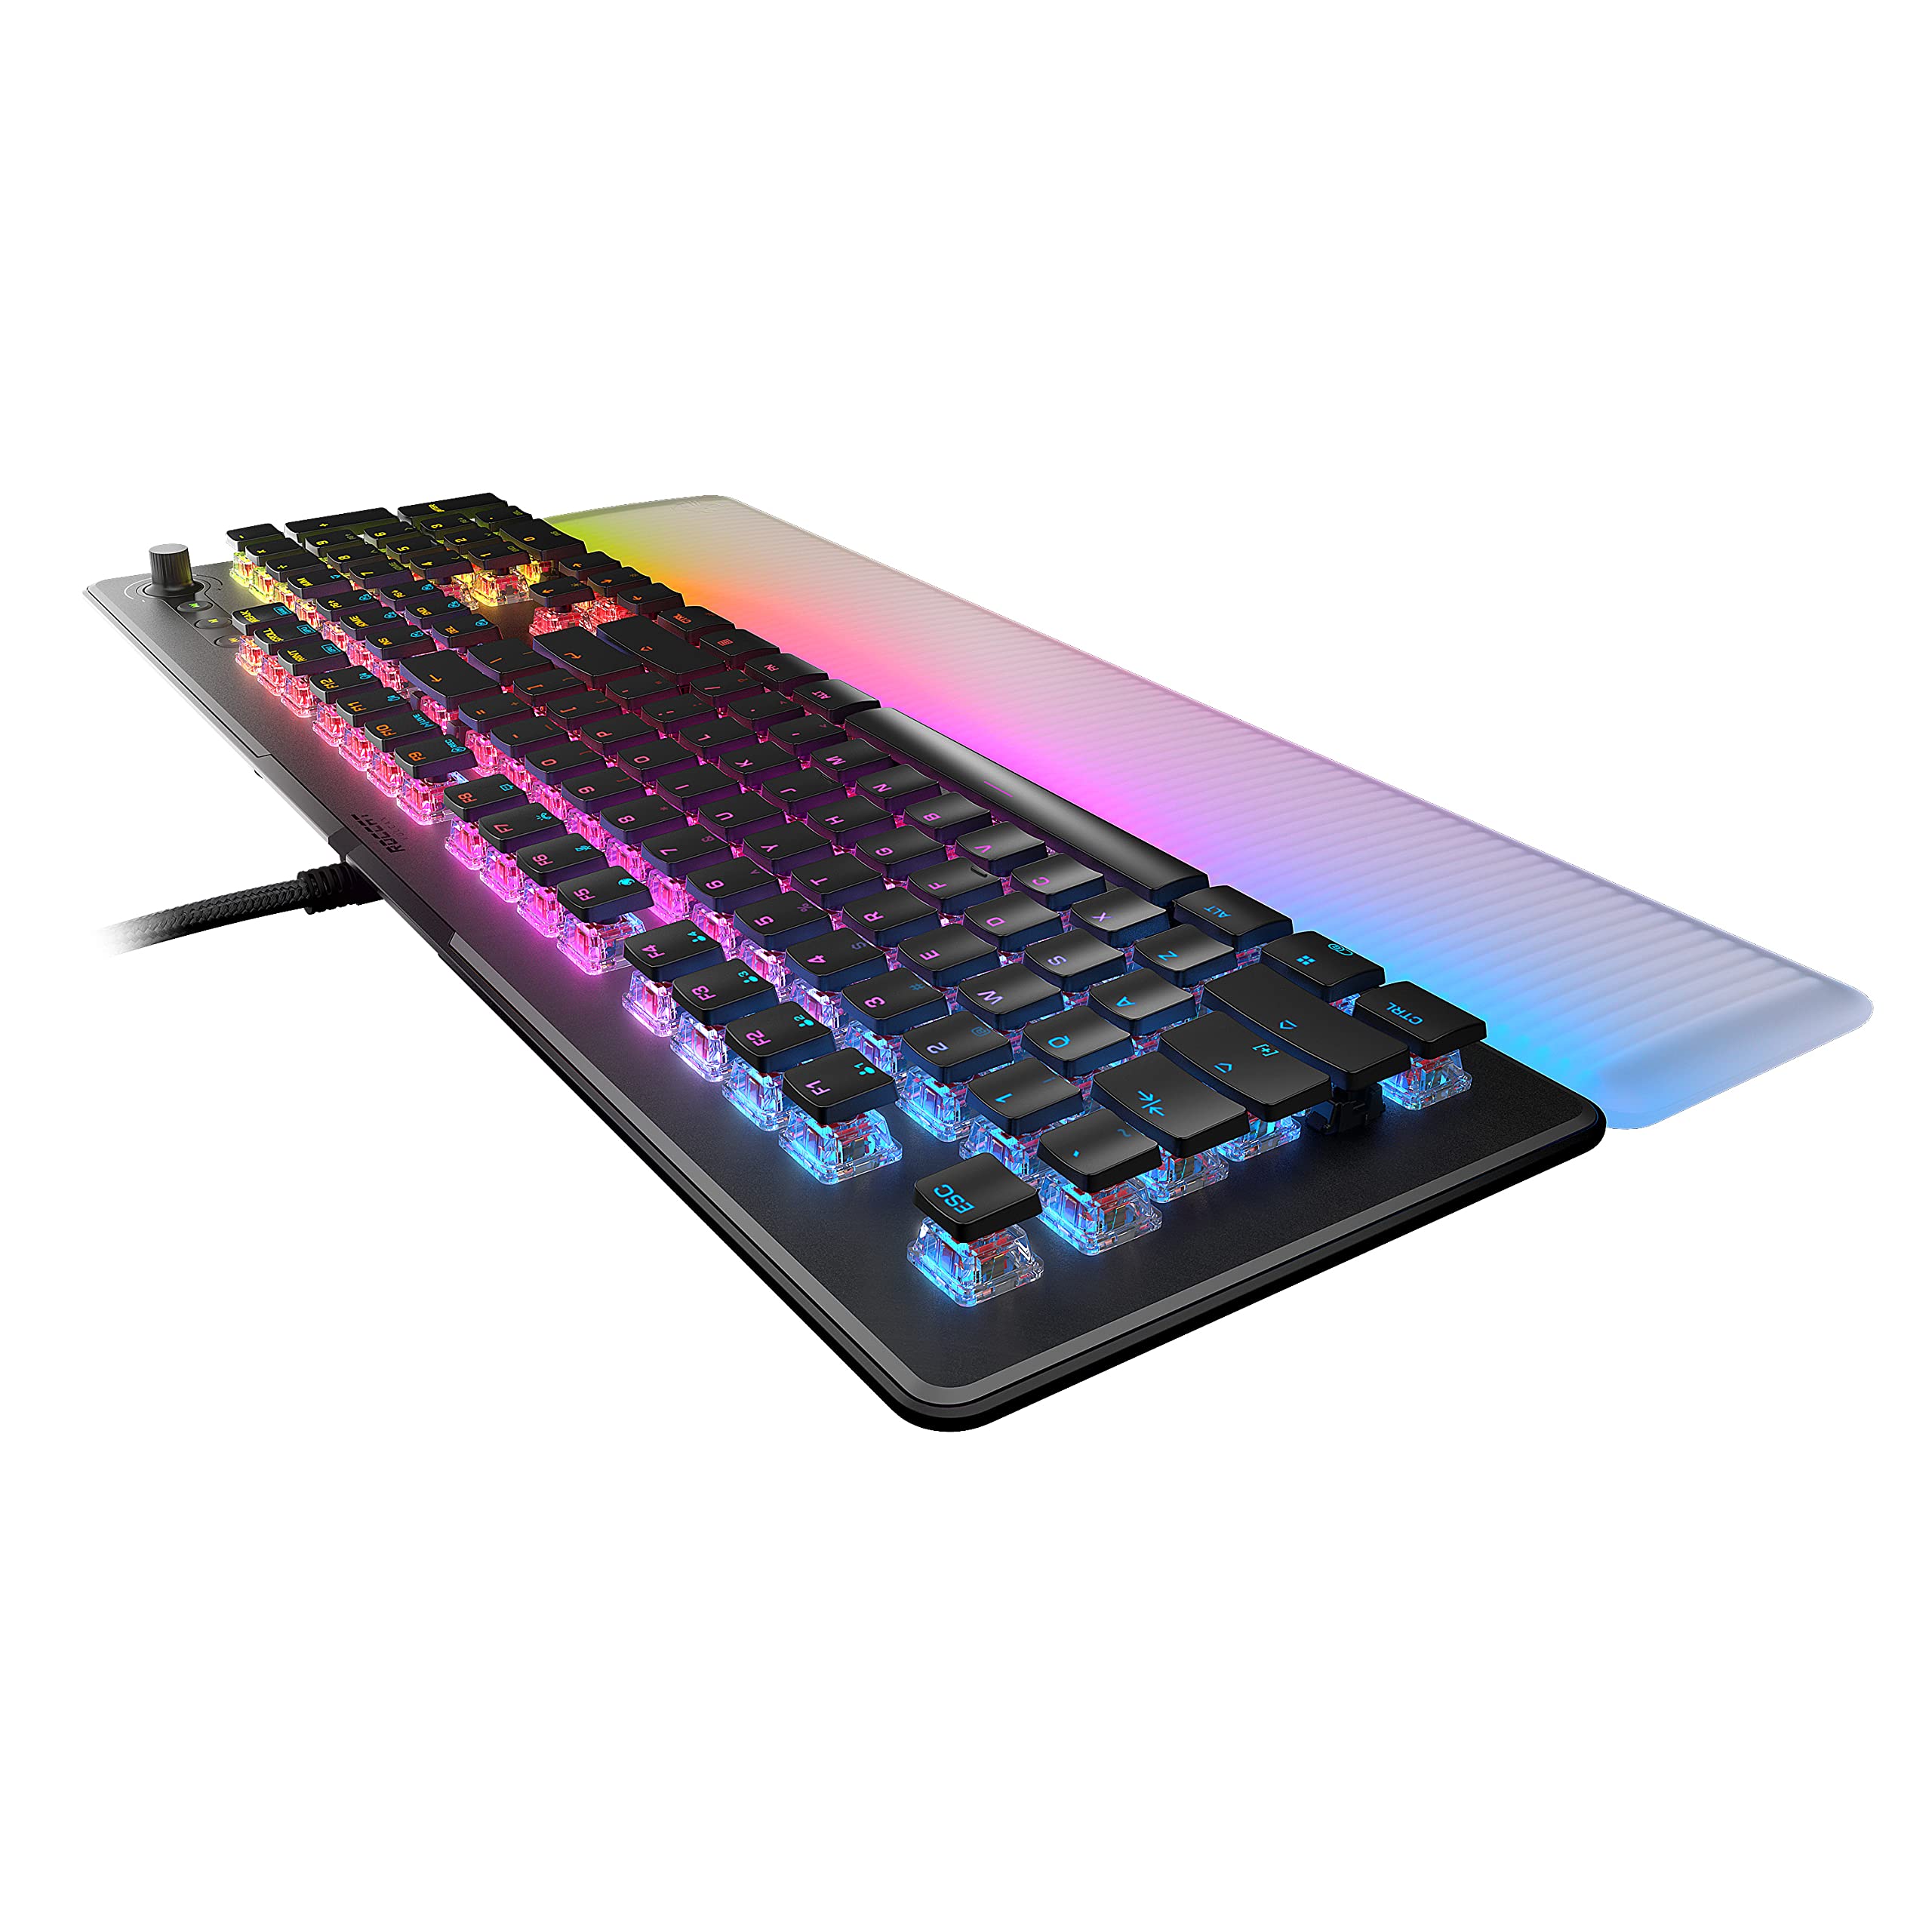 ROCCAT Vulcan II Max – Optical-Mechanical PC Gaming Keyboard with Customizable RGB Illuminated Keys and Palm Rest, Titan II Smooth Linear Switches, Aluminum Plate, 100M Keystroke Durability – Black